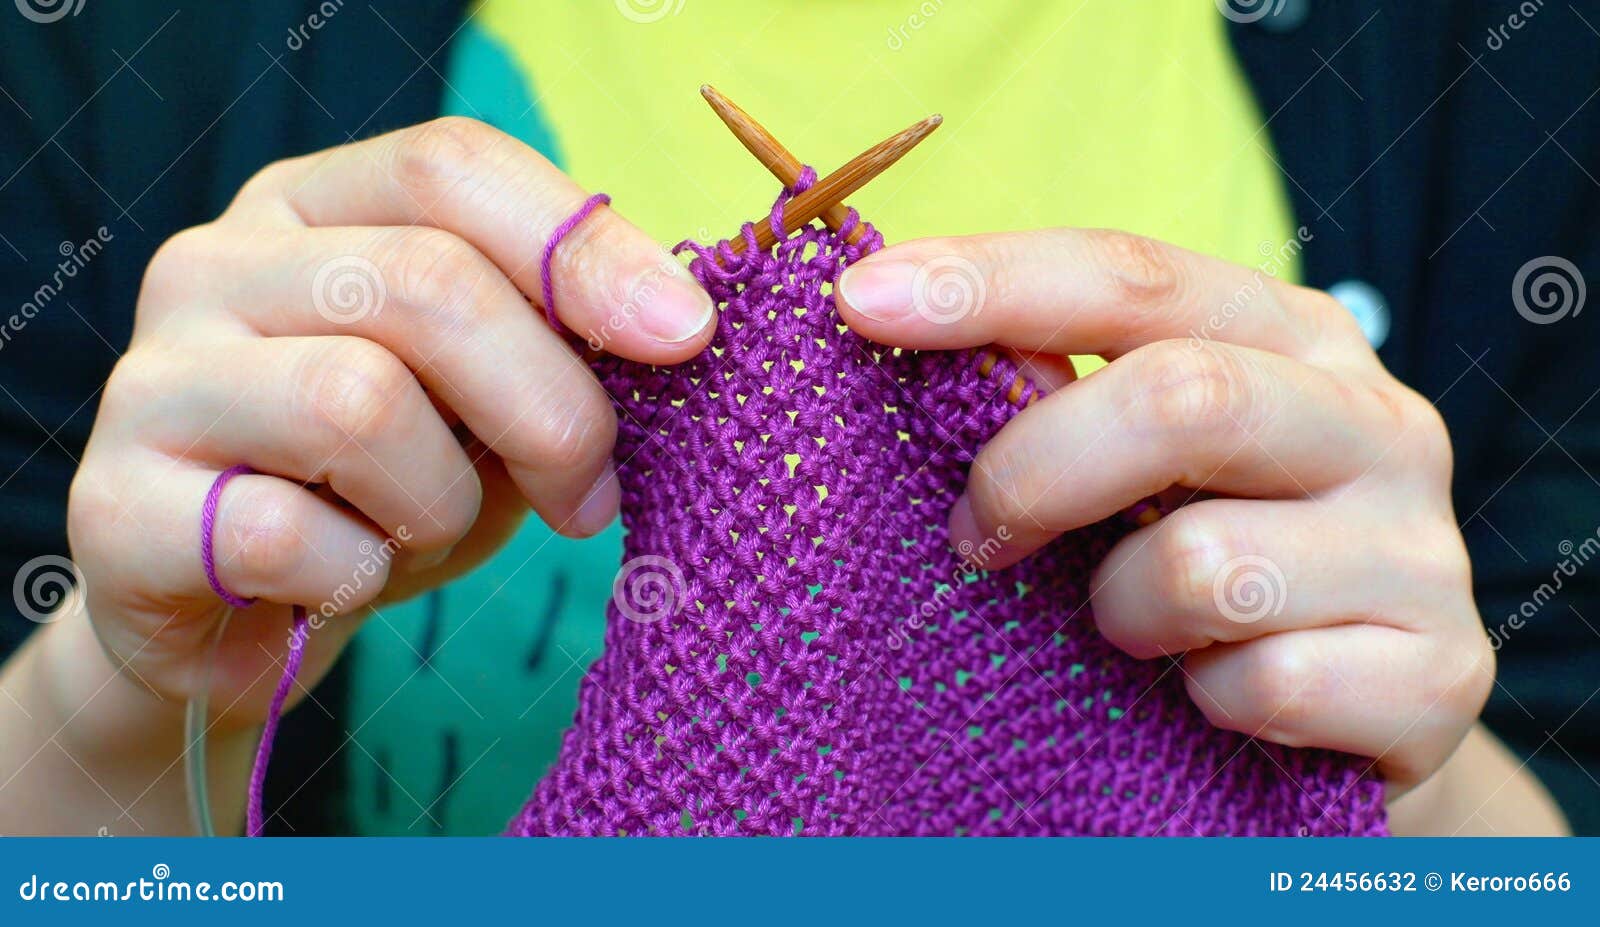 Hands knitting stock photo. Image of thread, pattern - 24456632